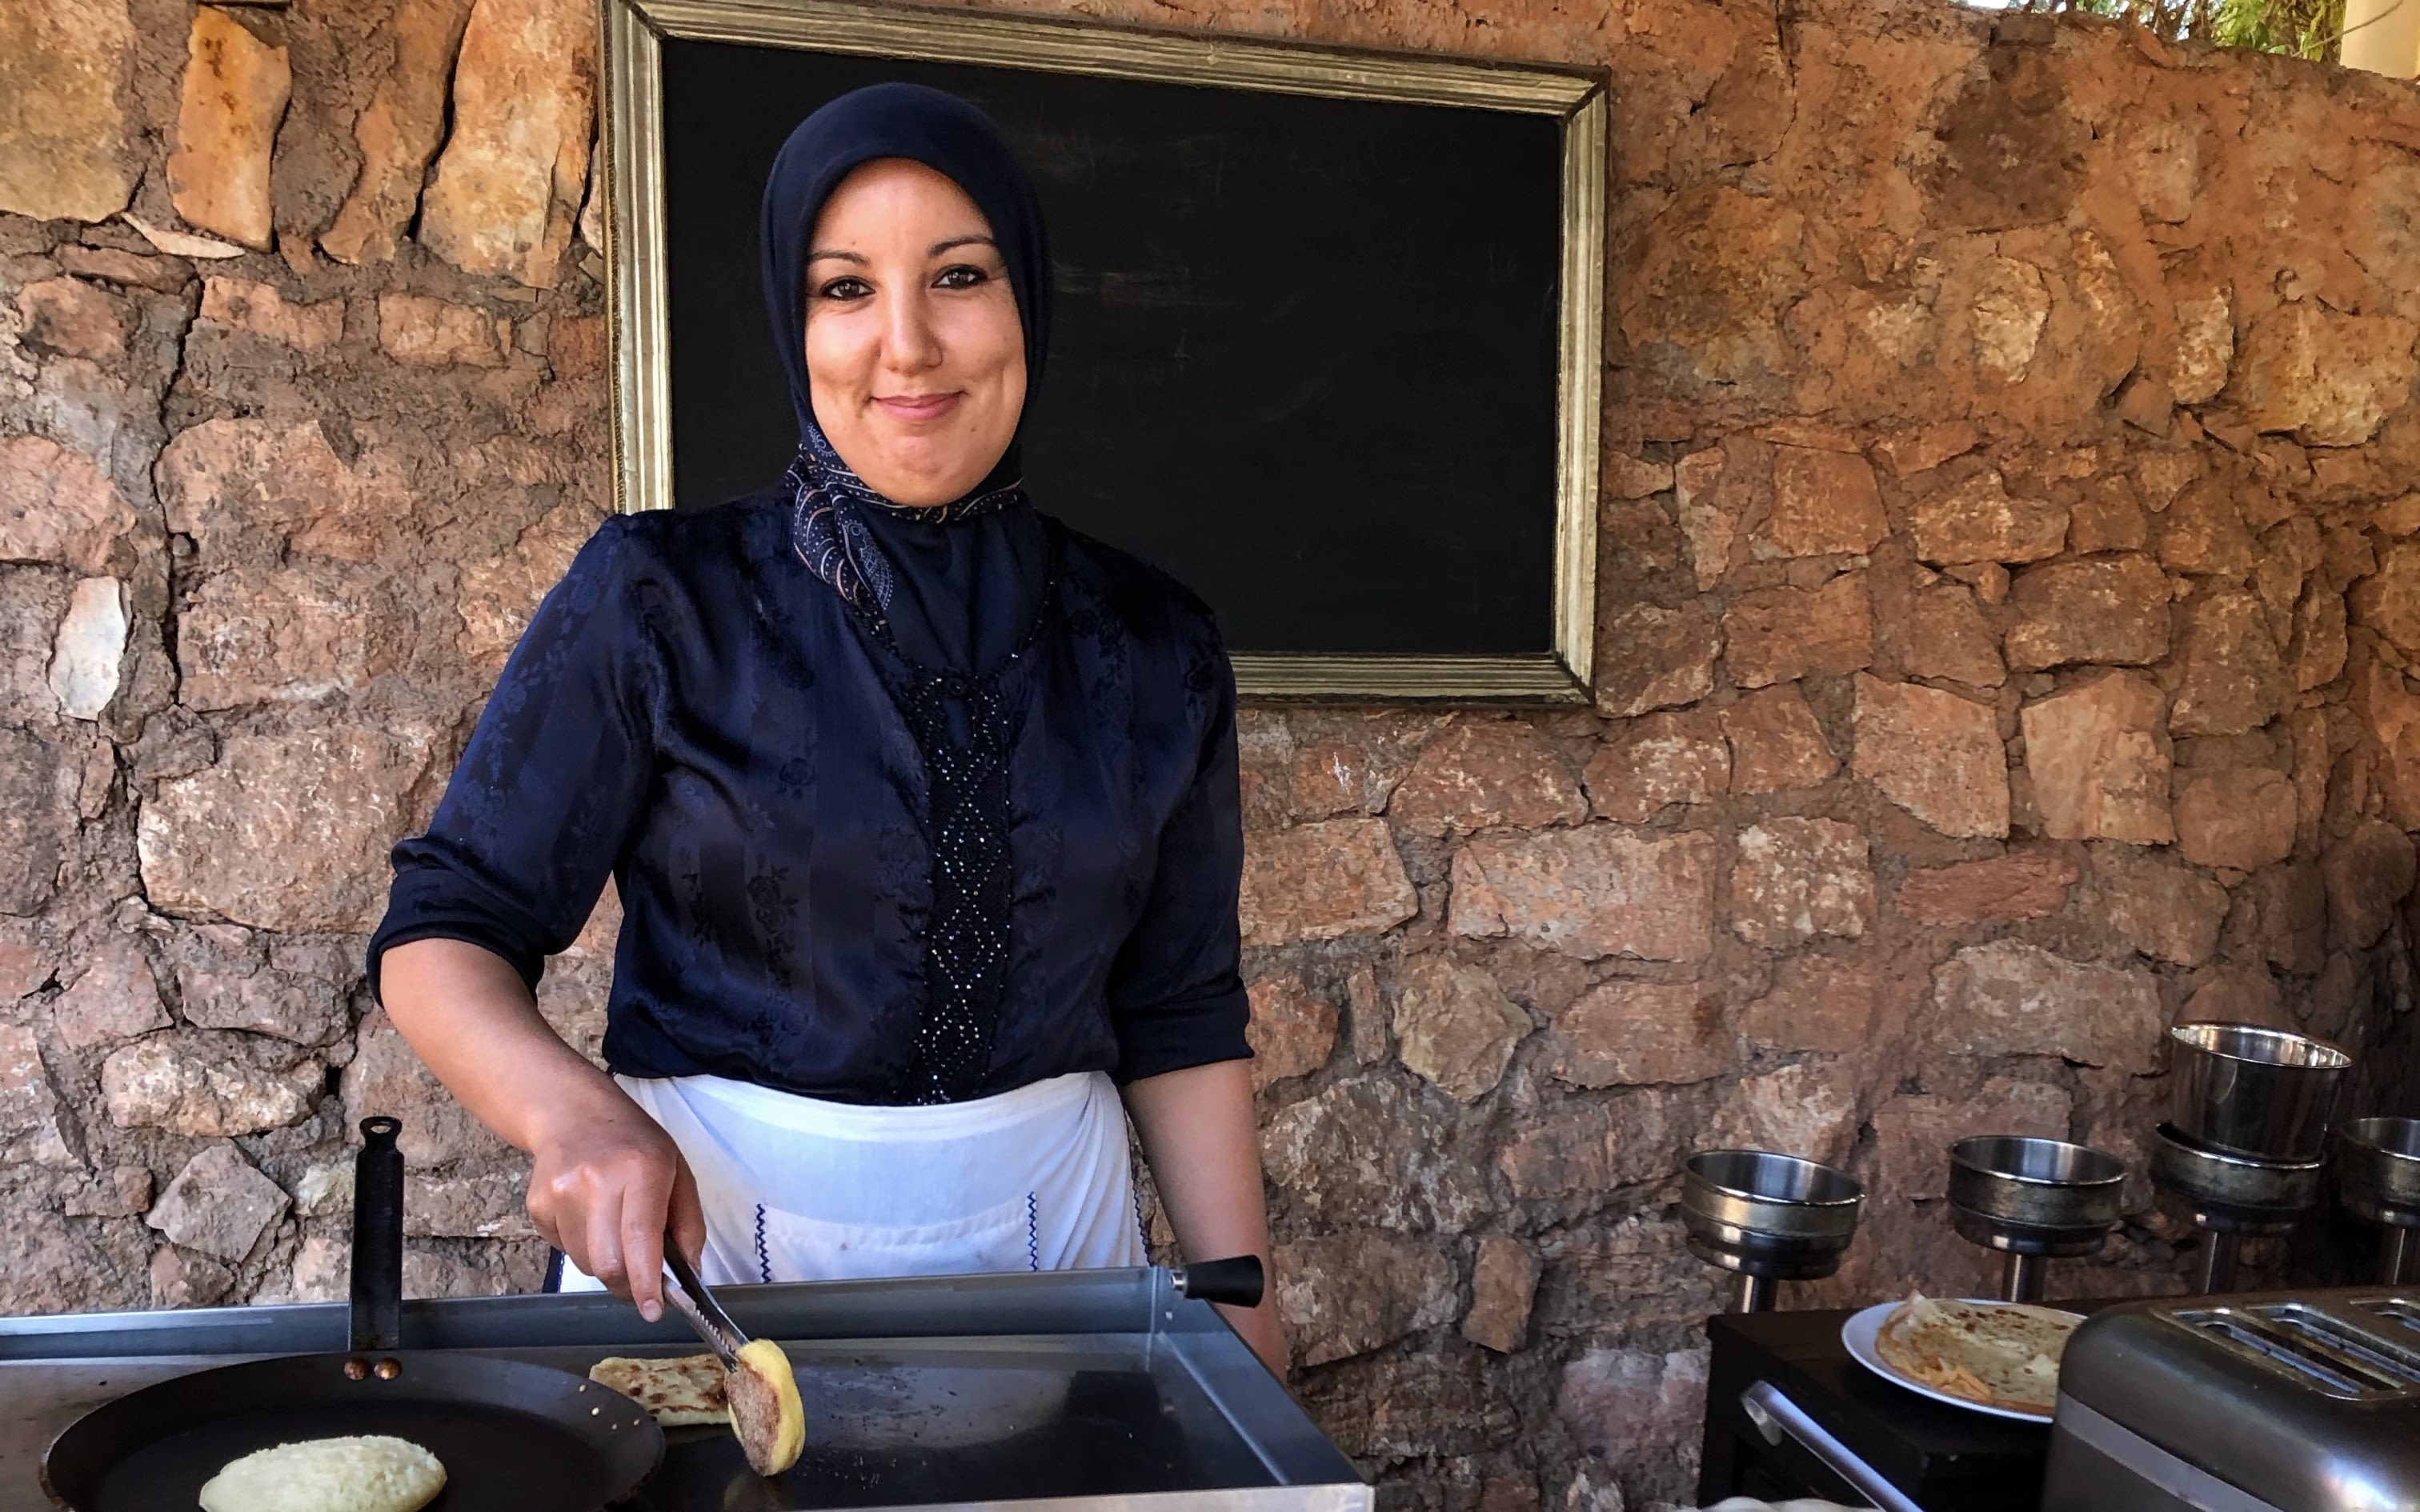 A smiling woman serves breakfast at Kasbah Tamadot in Morocco